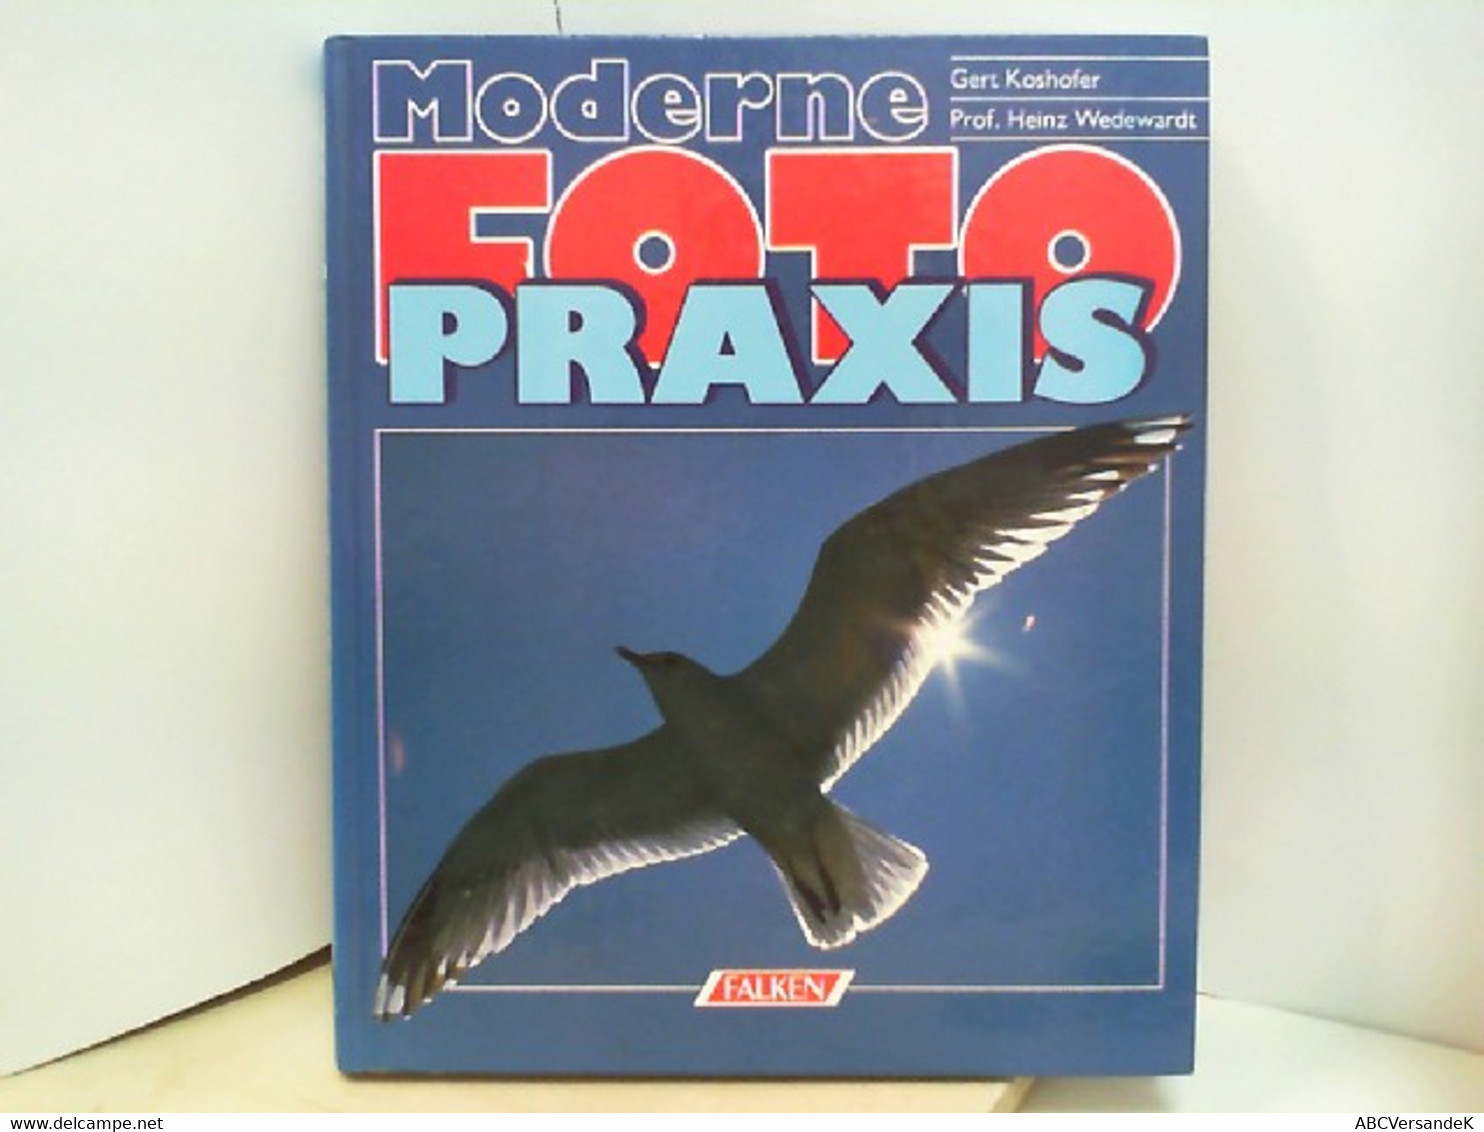 Moderne Fotopraxis - Photographie